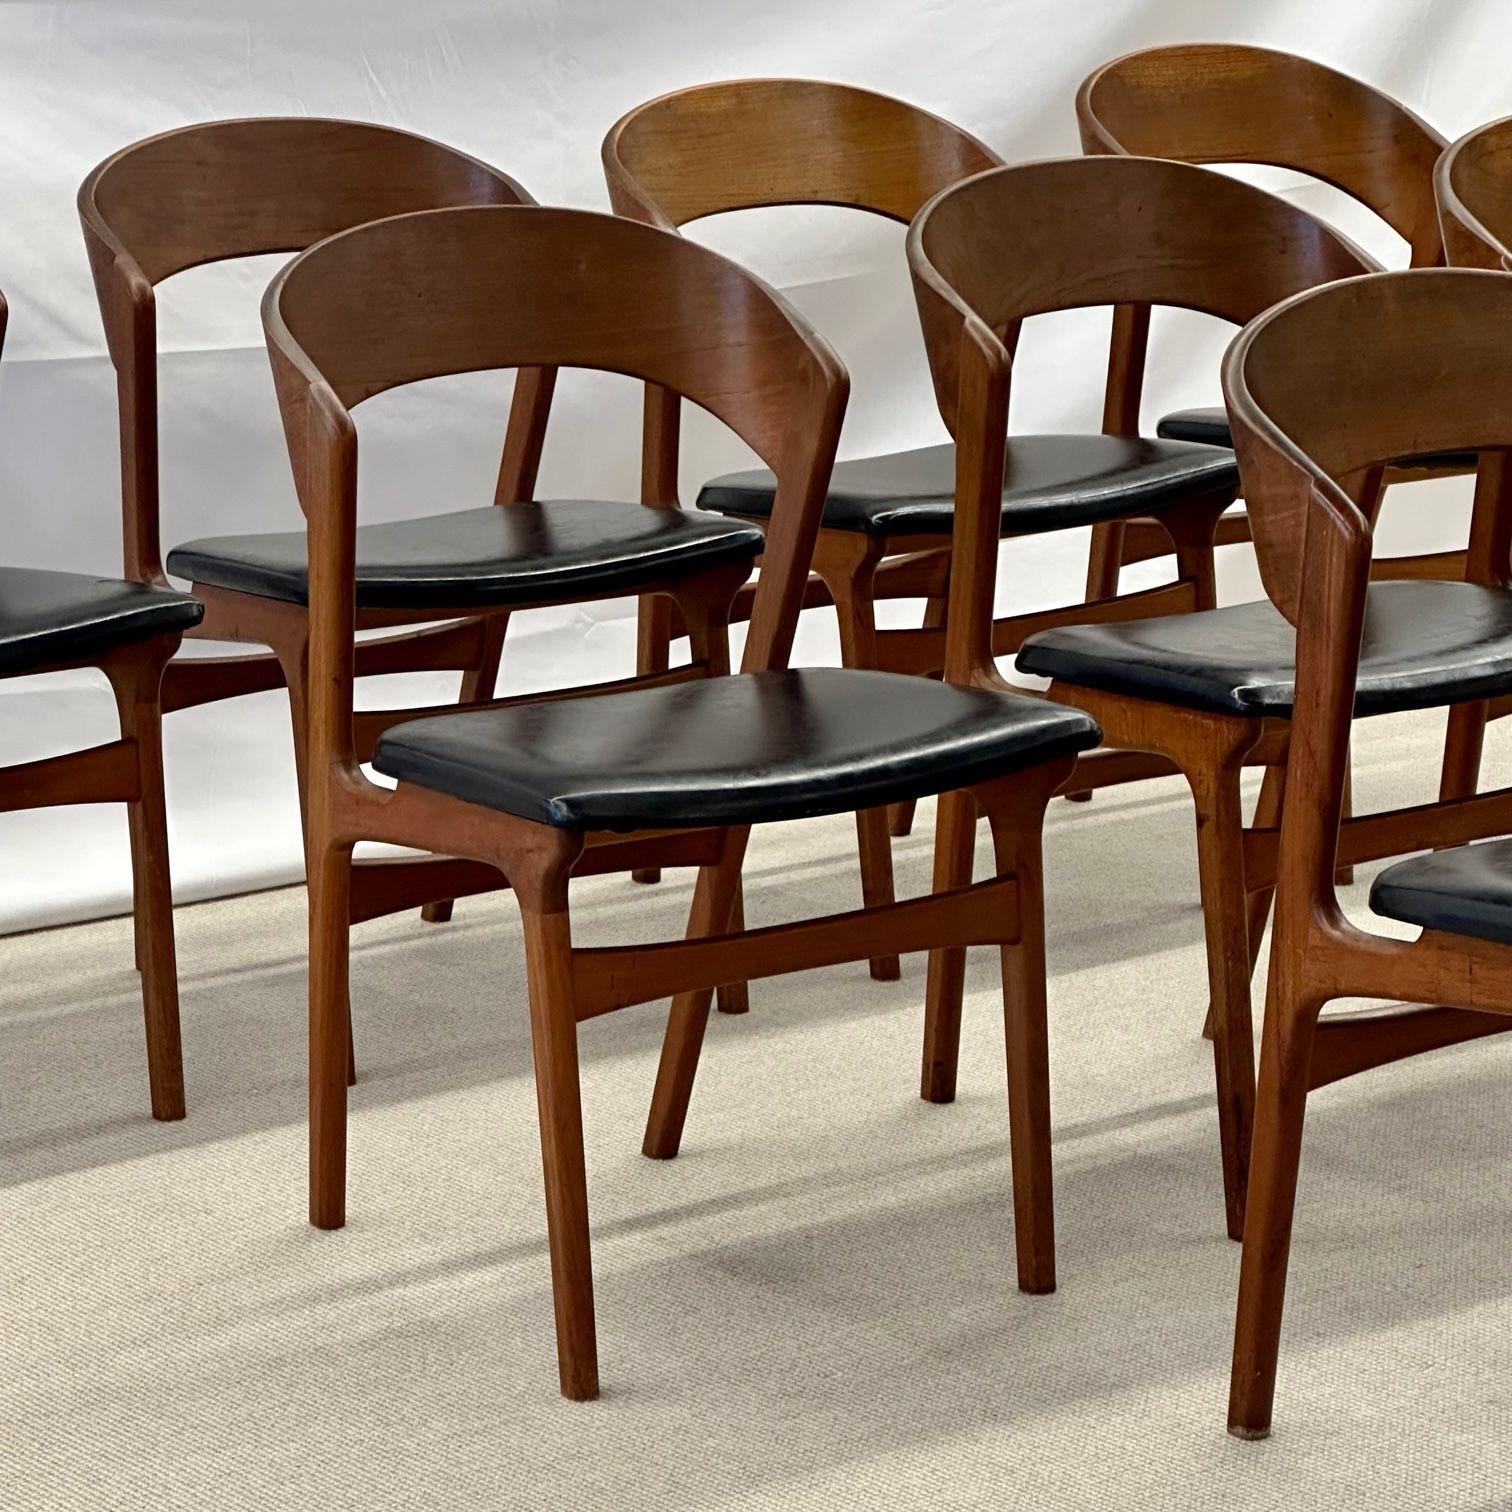 Set of Ten Kai Kristiansen Style Mid-Century Modern Dining / Side Chairs, Danish In Good Condition For Sale In Stamford, CT